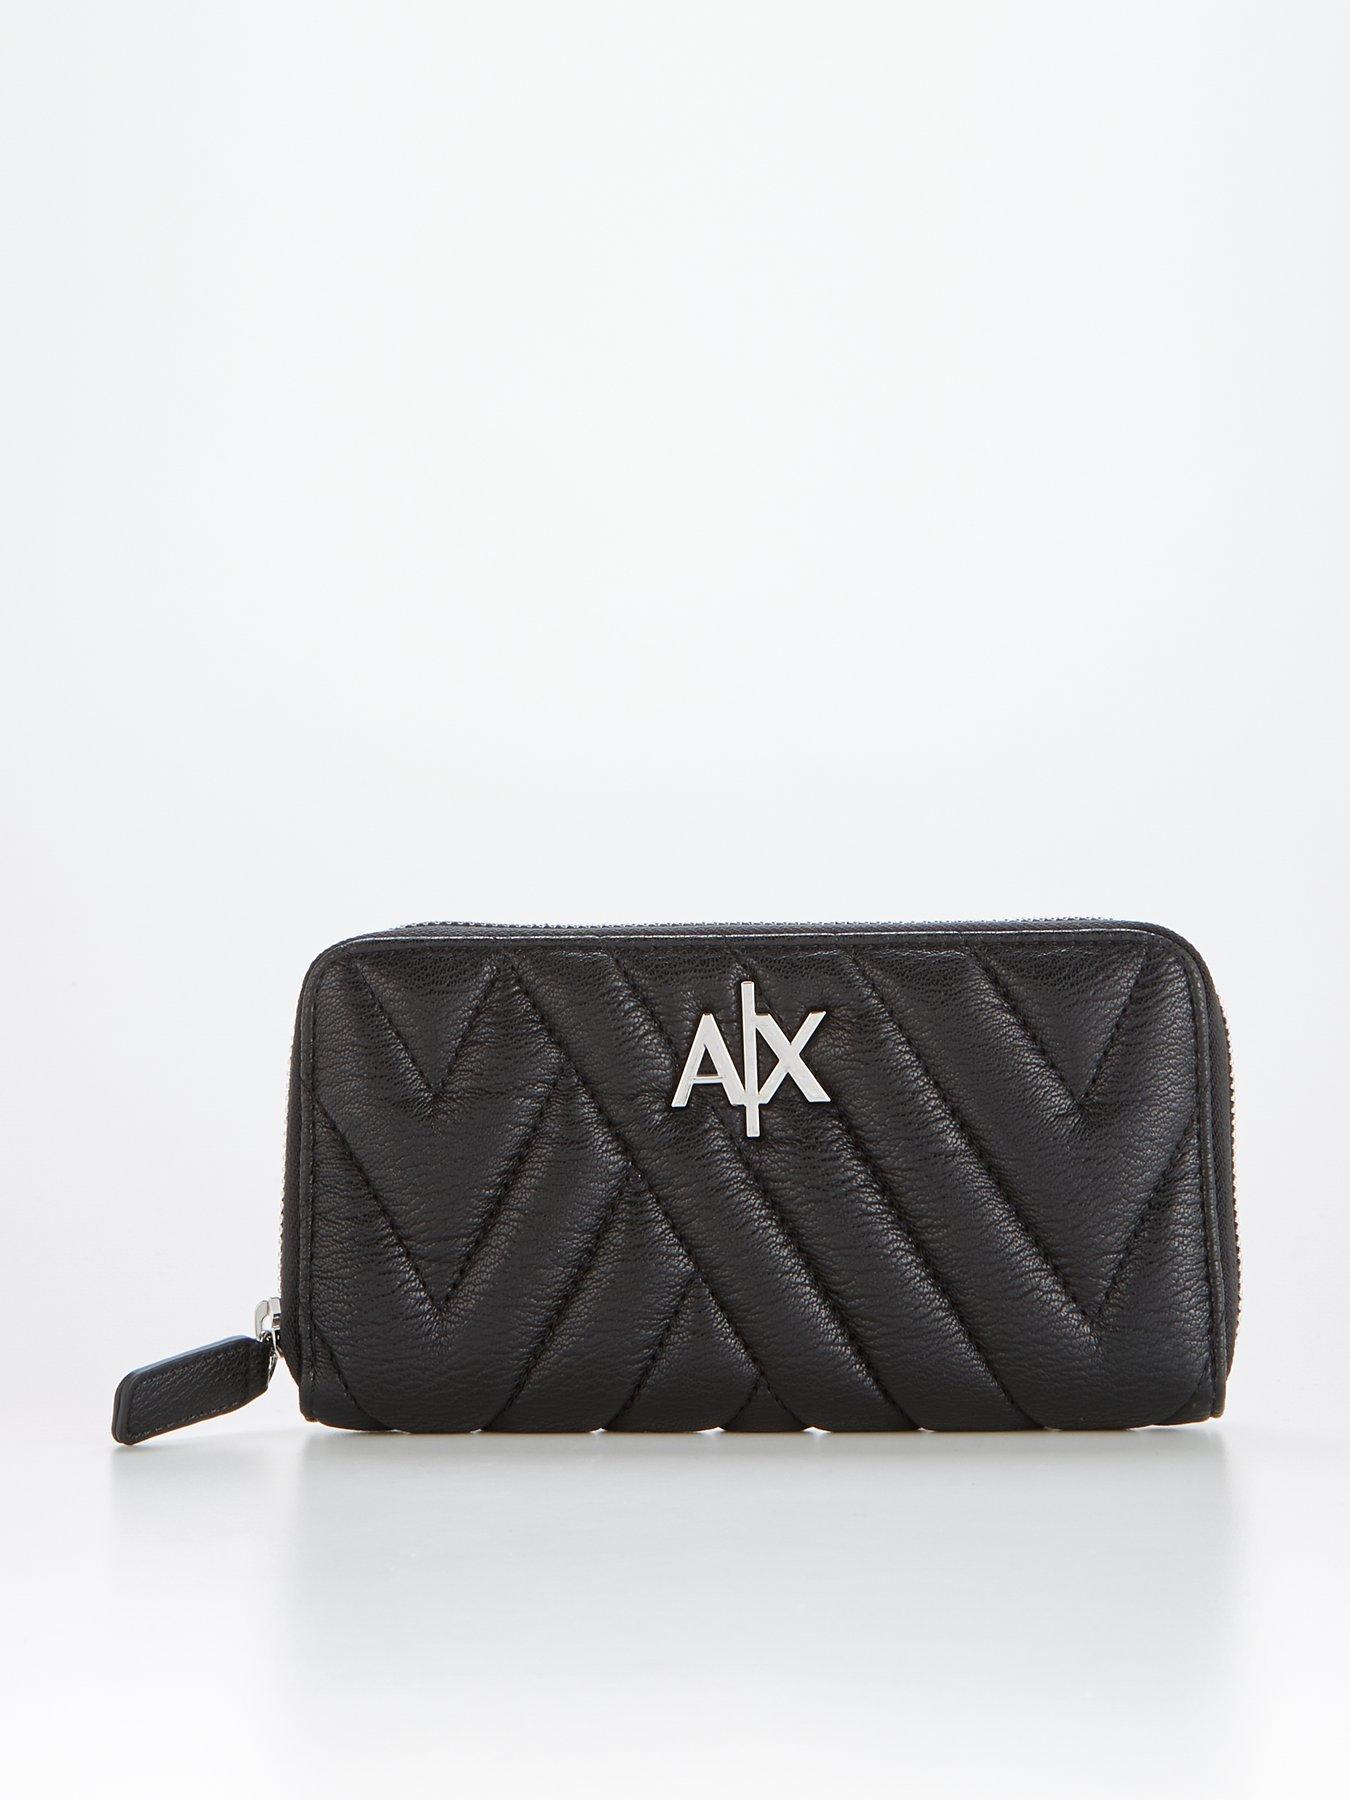 Armani Exchange Quilted Purse - Black 